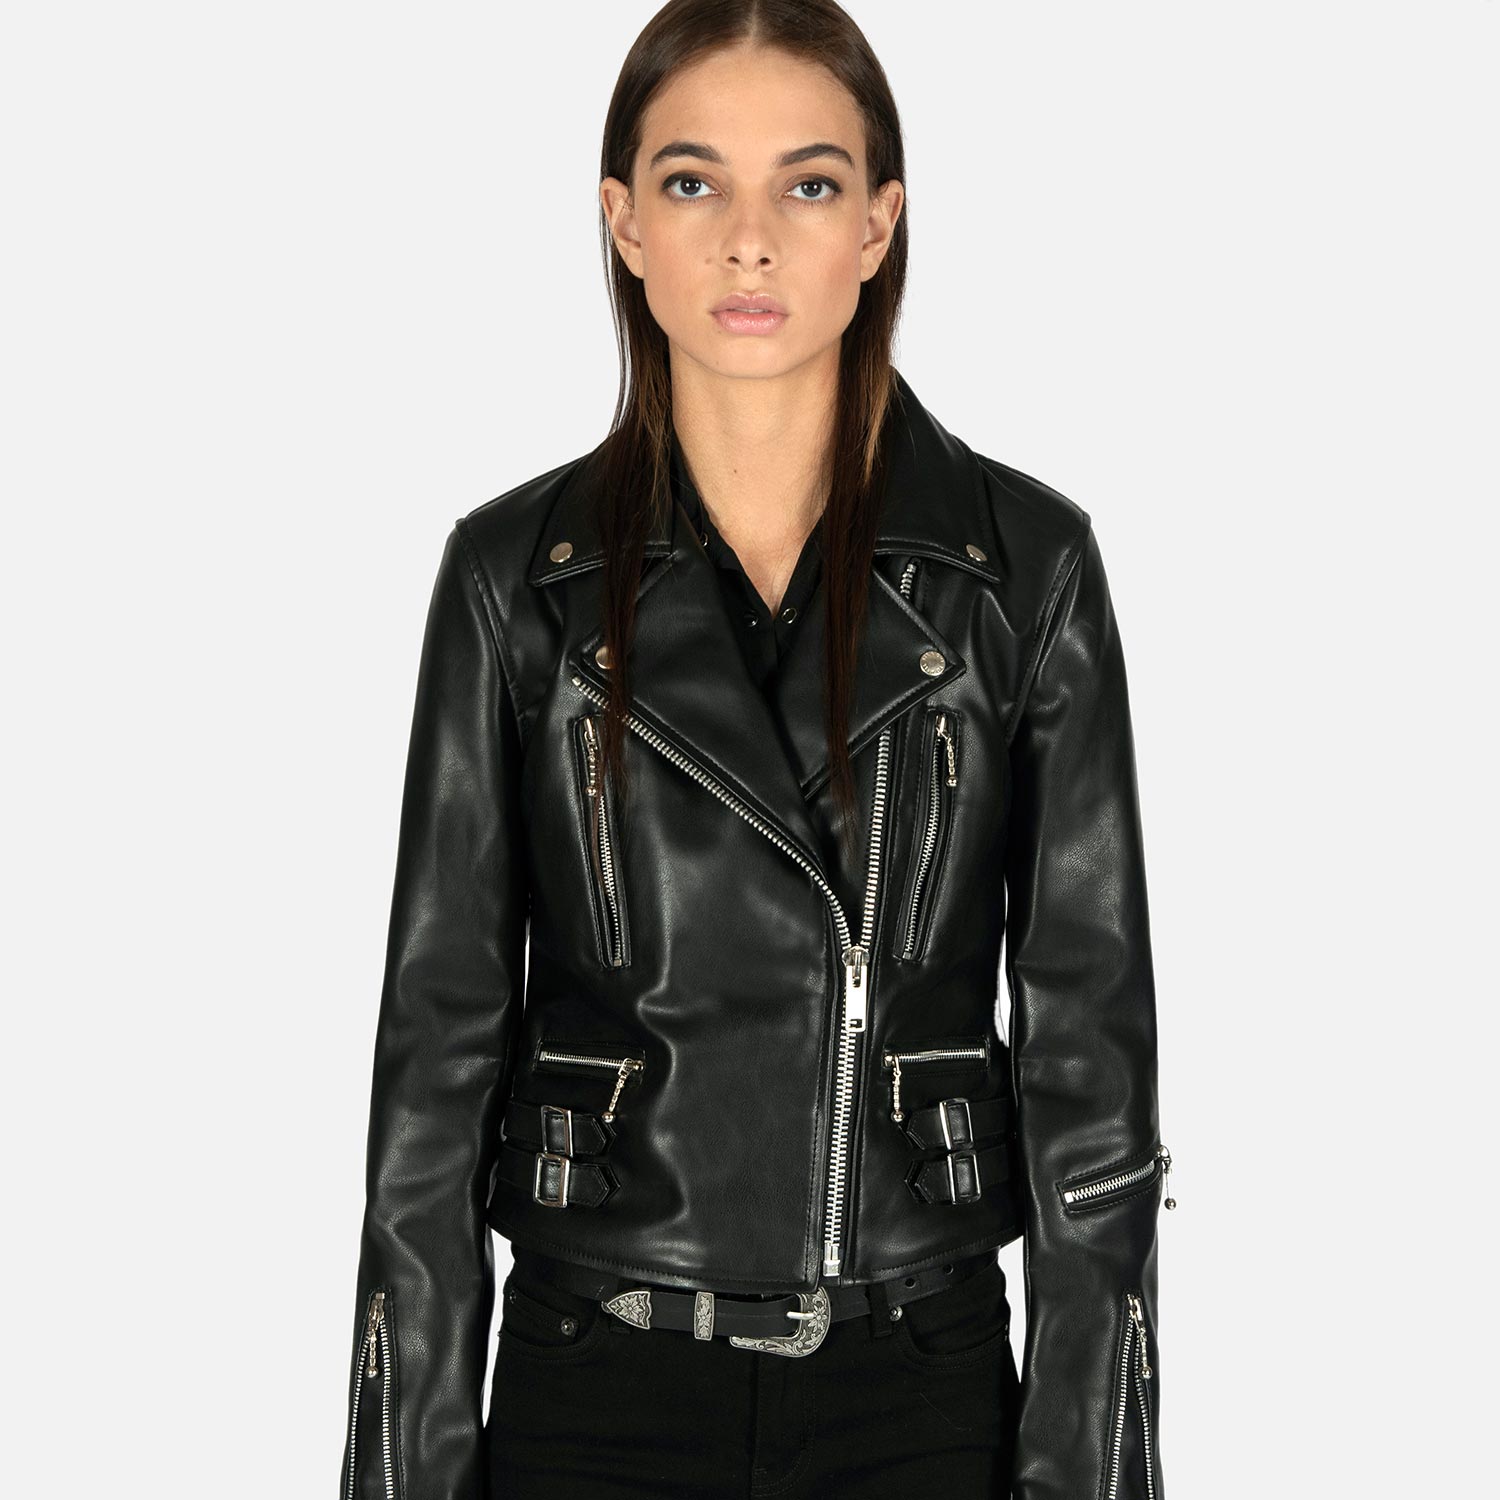 Vegan Defector - Faux Leather Jacket | Straight To Hell Apparel